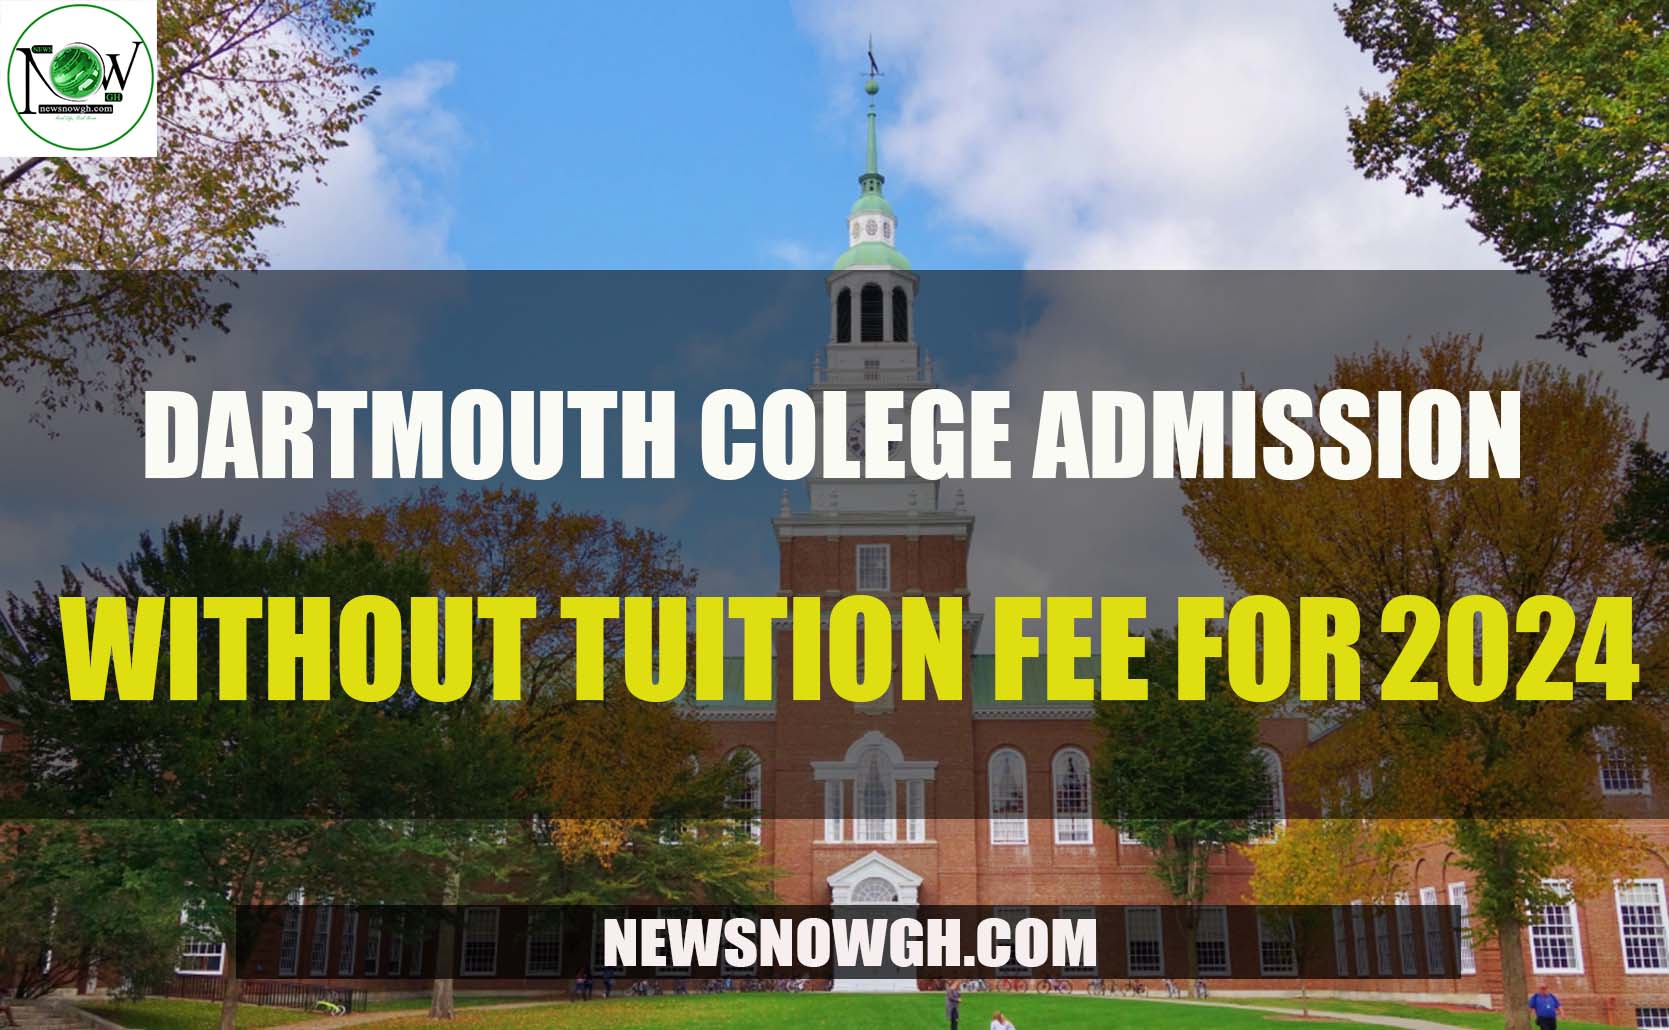 Dartmouth College admissions without tuition fee for 202425